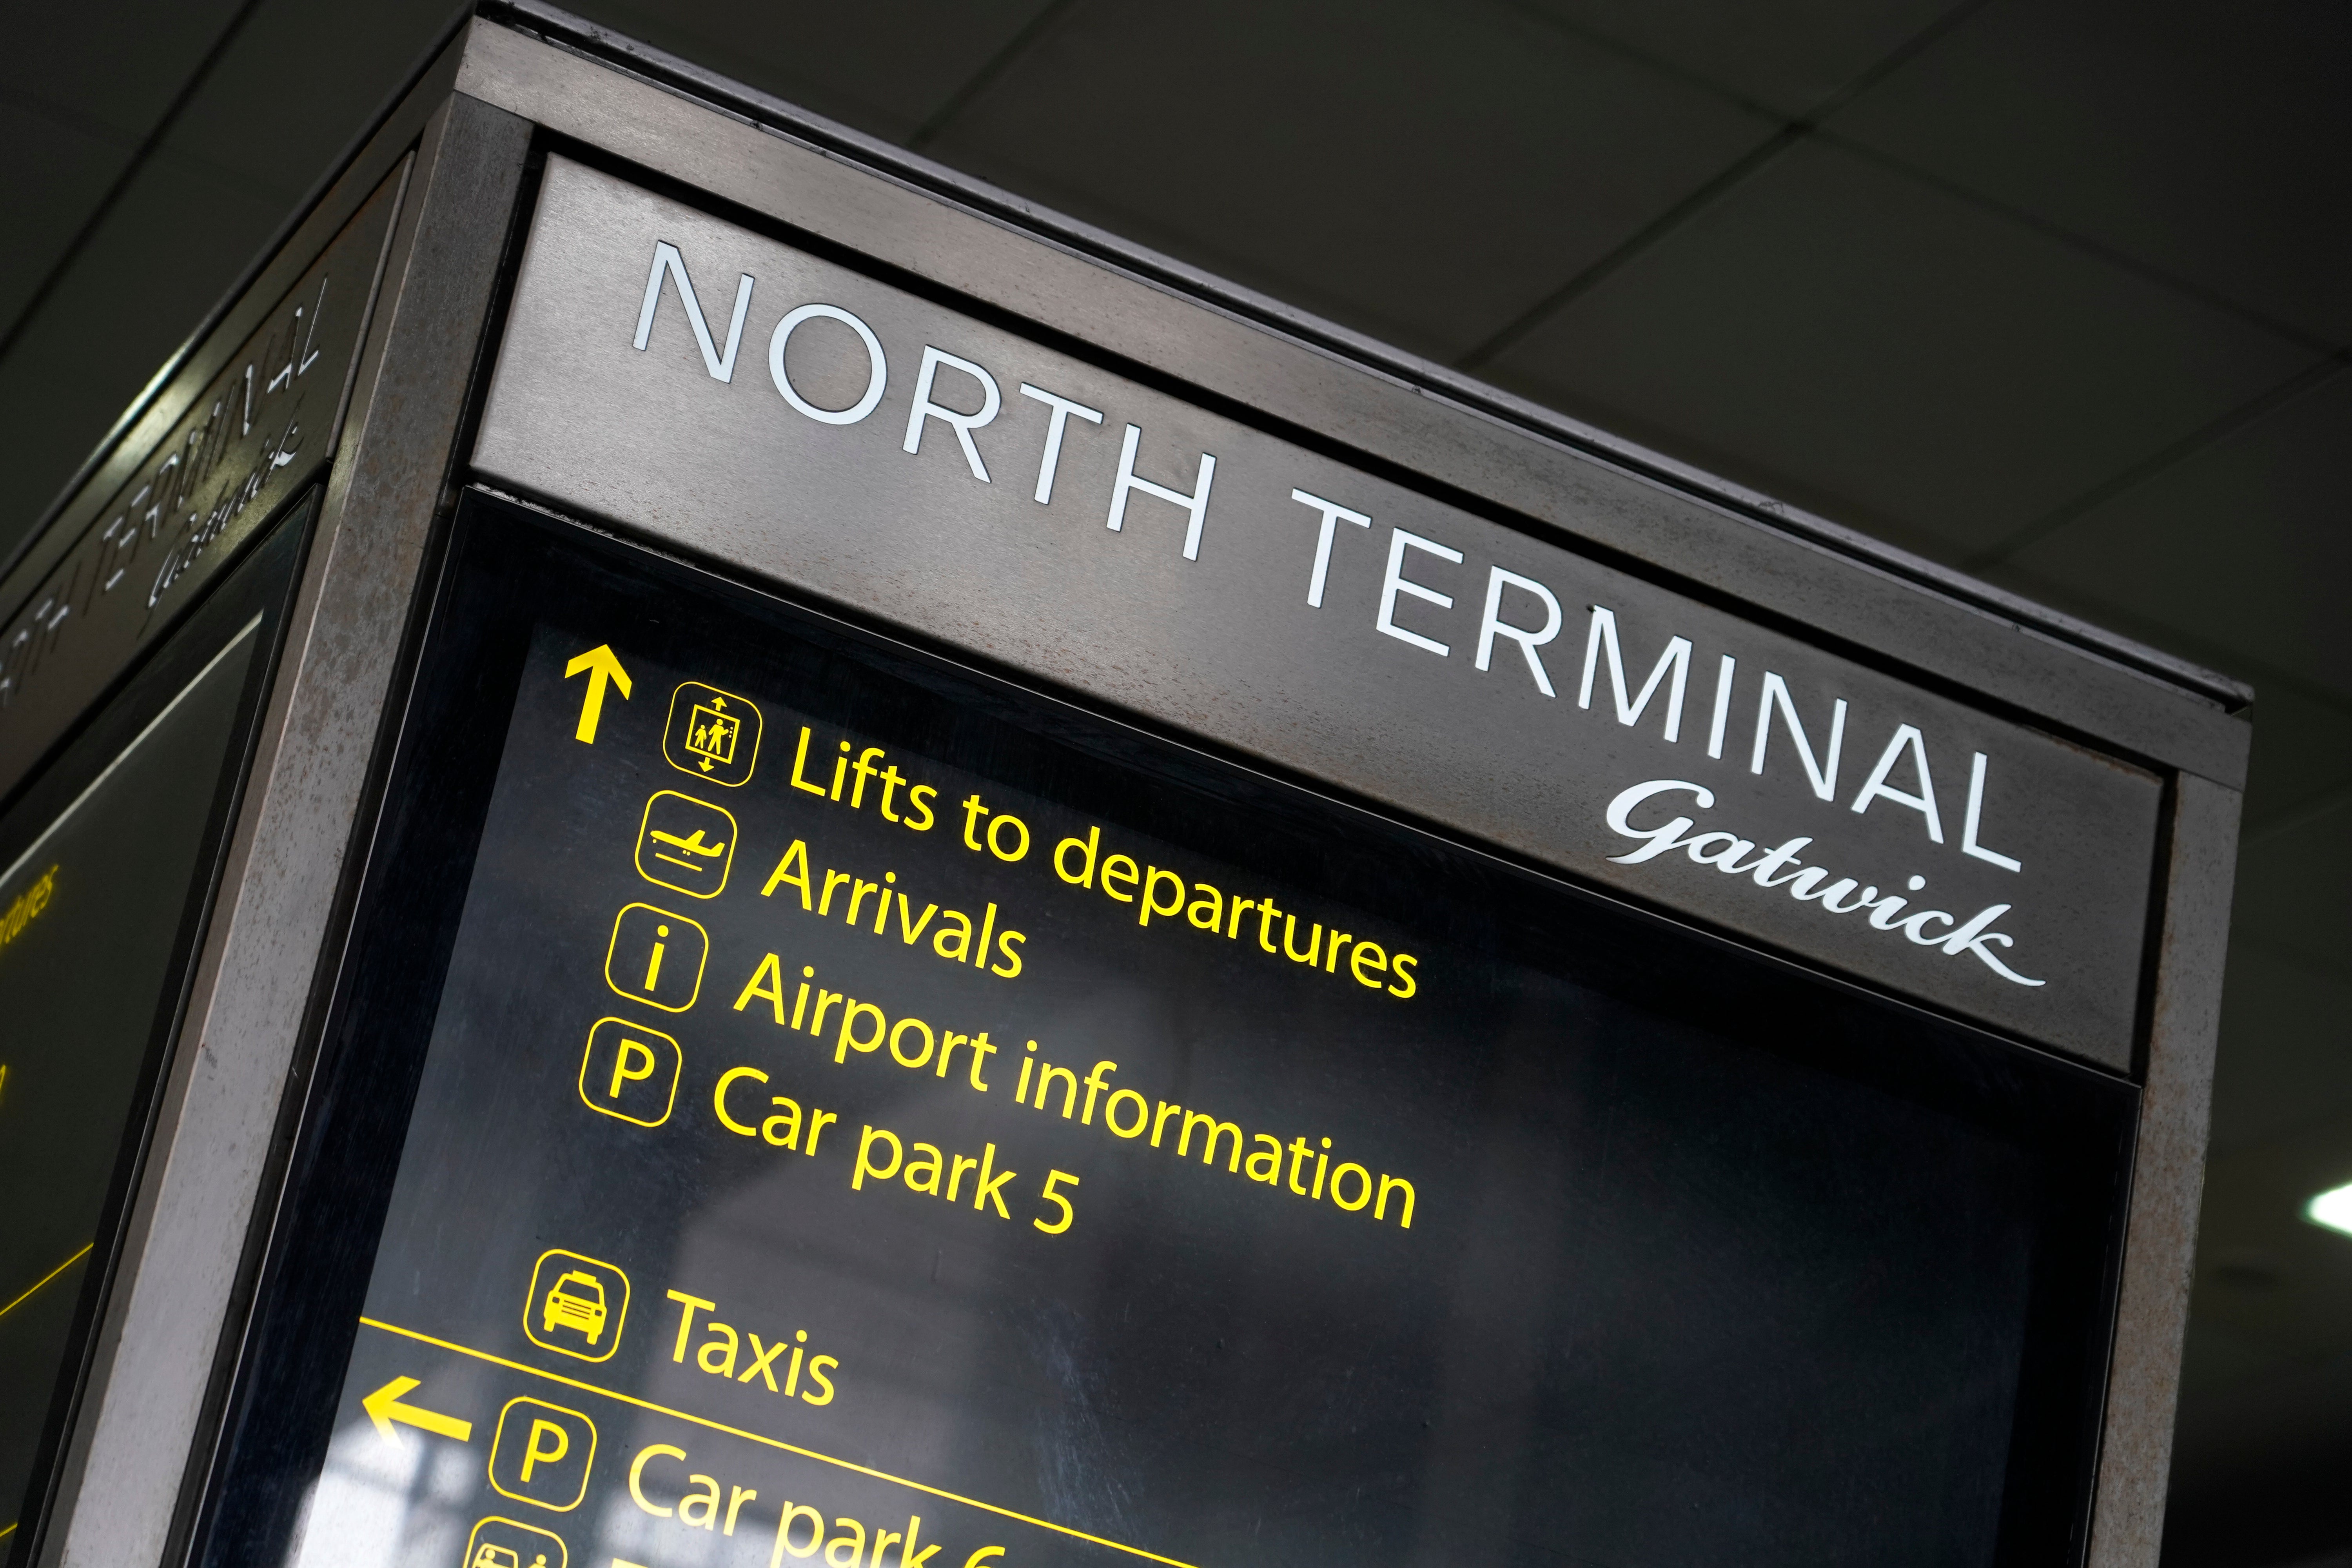 Dozens of flights to and from Europe were cancelled because of poor weather at Gatwick Airport